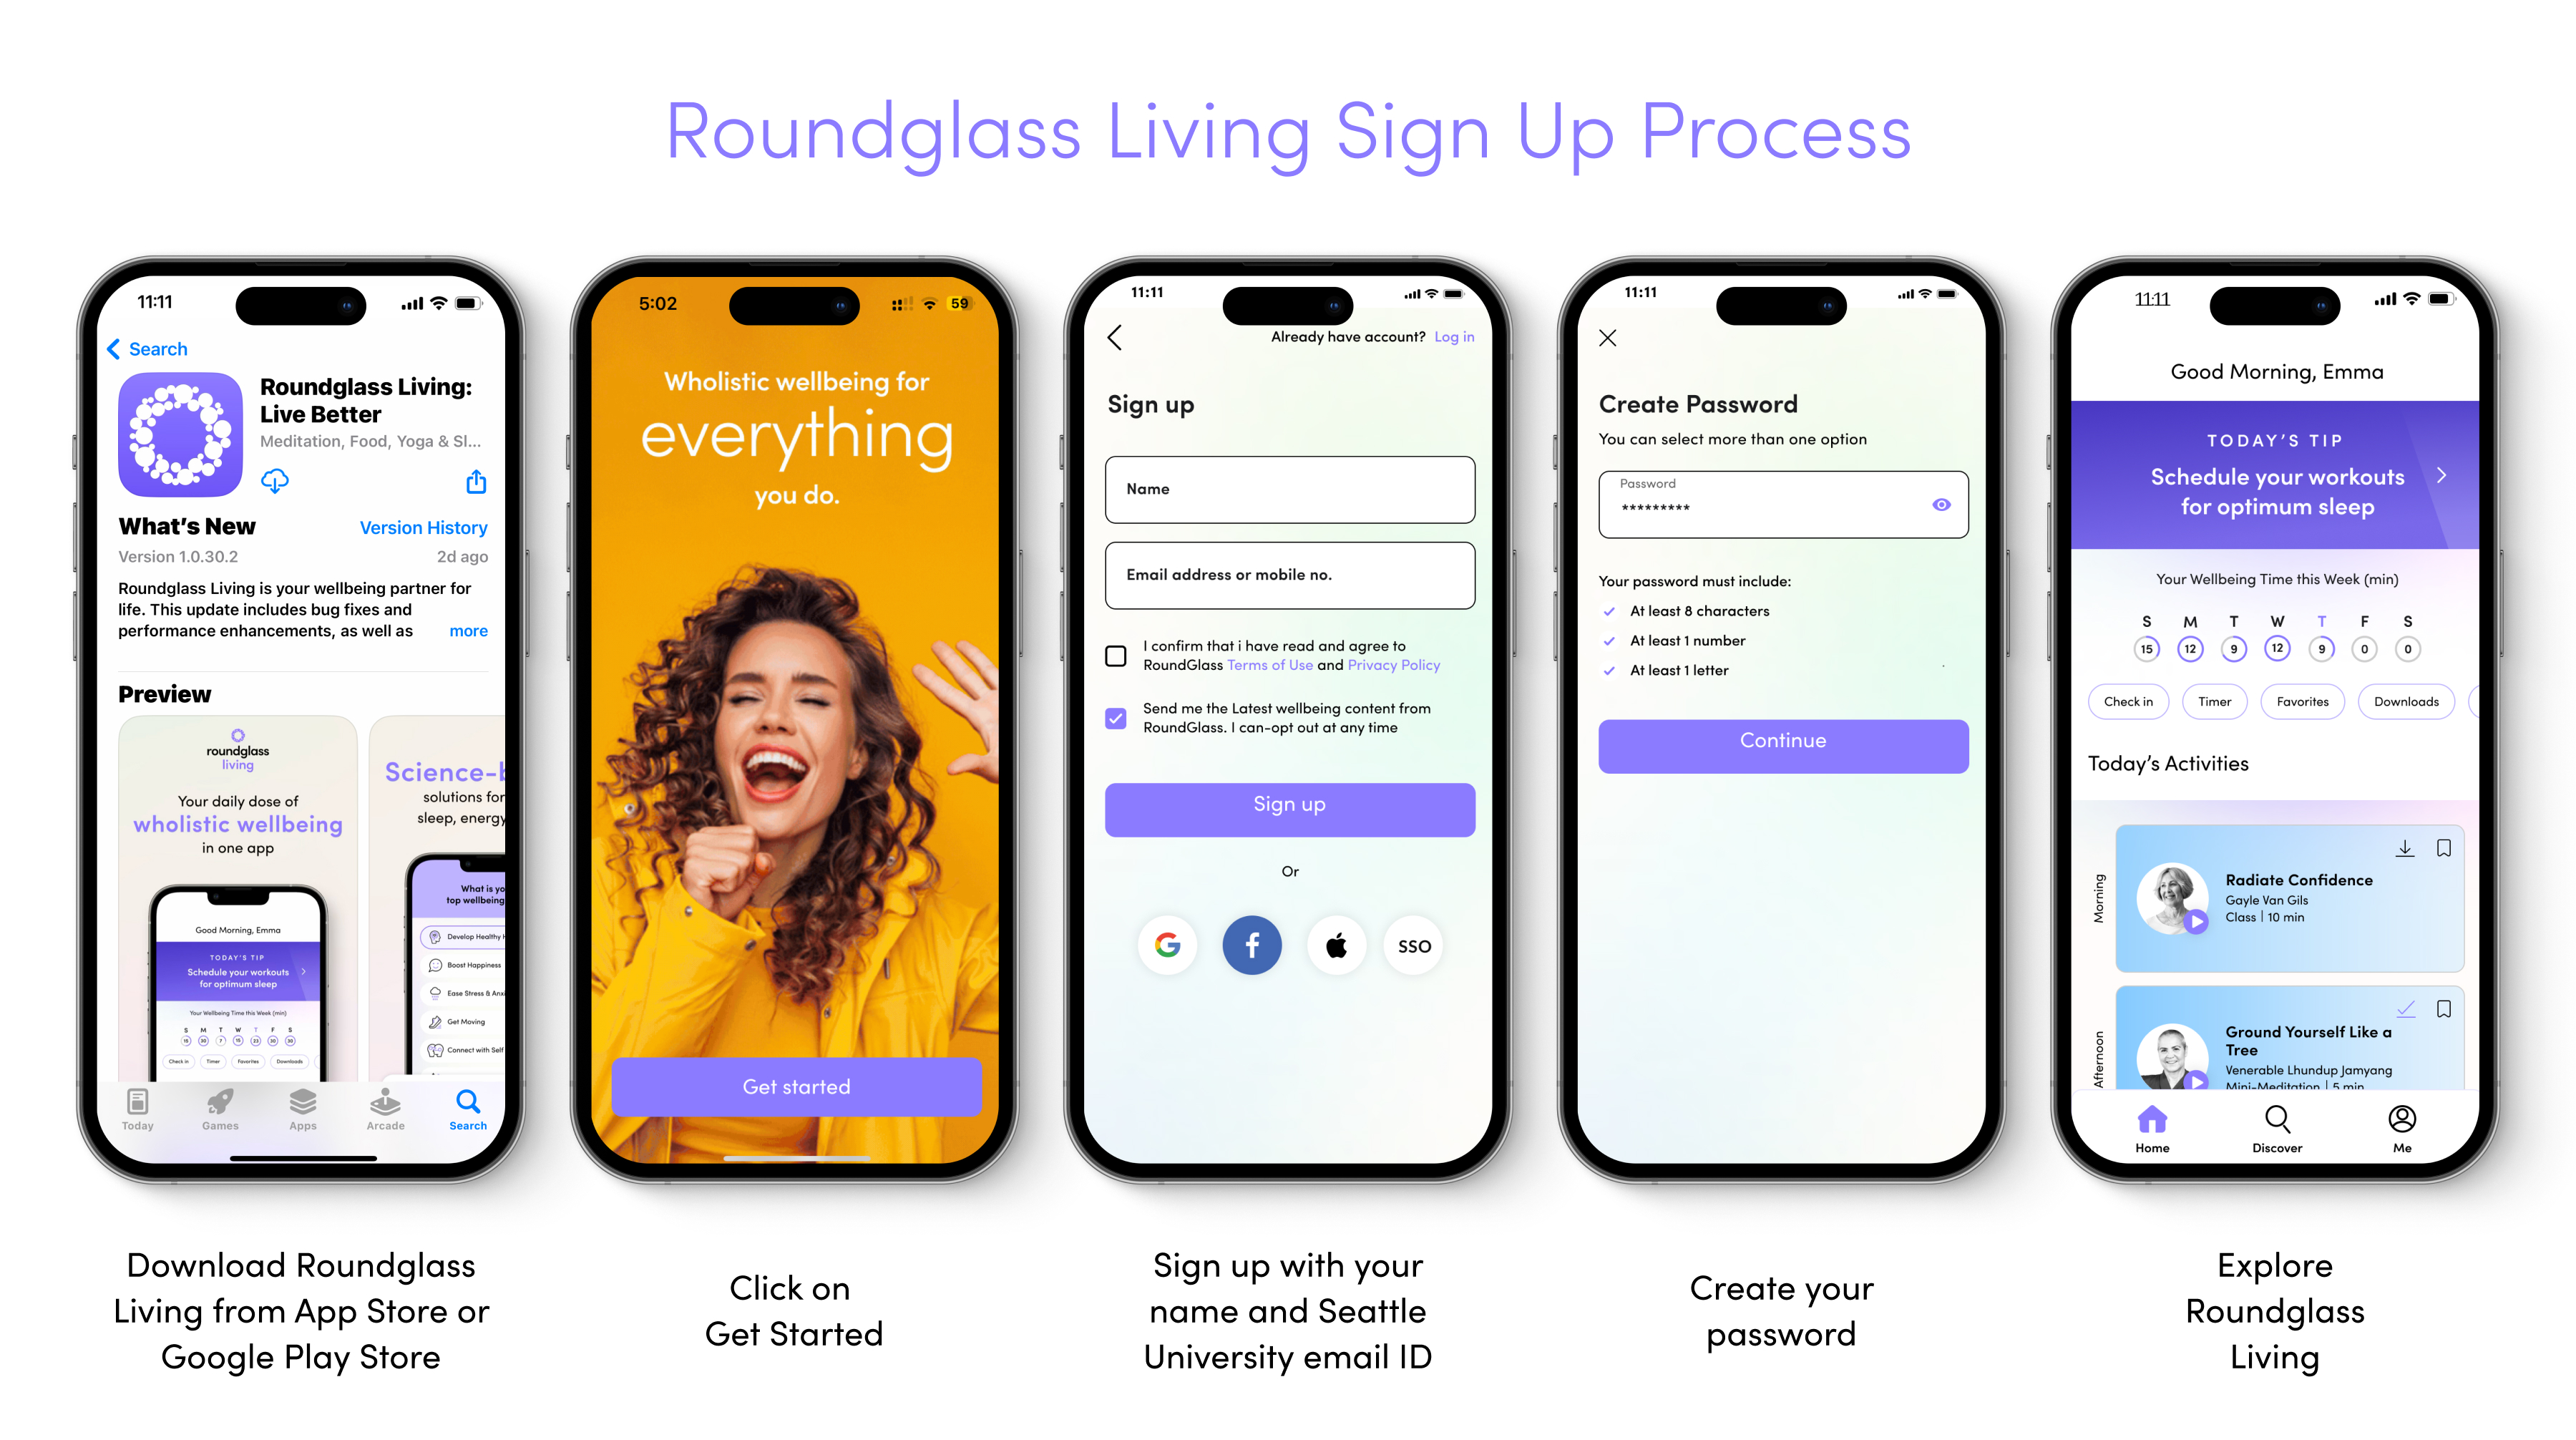 Phone's screen showing Roundglass Living Sign Up Process